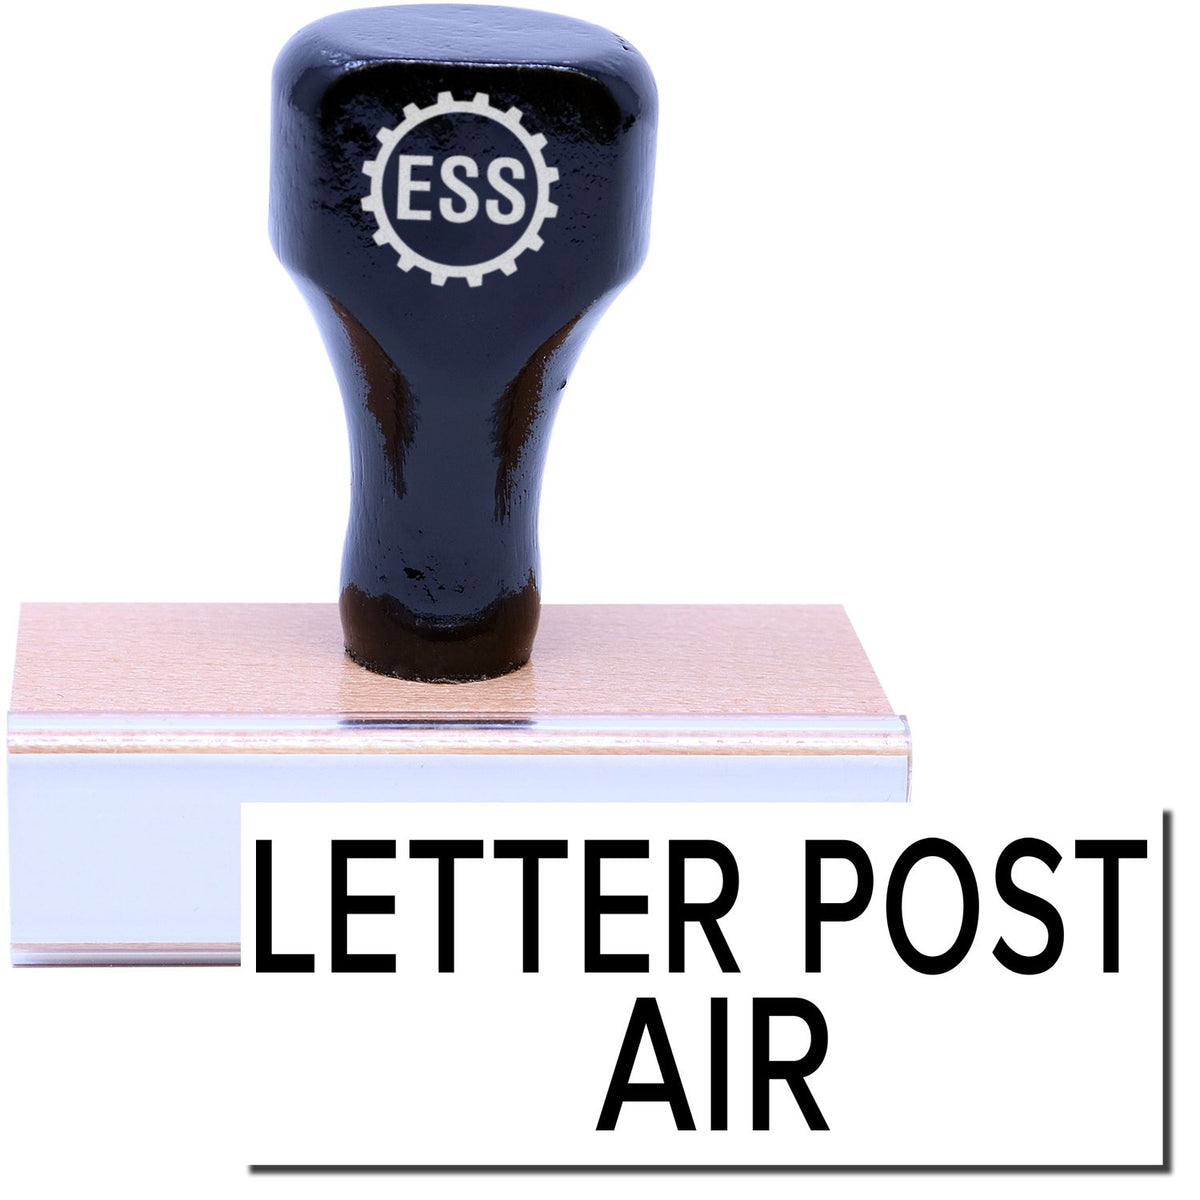 A stock office rubber stamp with a stamped image showing how the text &quot;LETTER POST AIR&quot; in a large font is displayed after stamping.